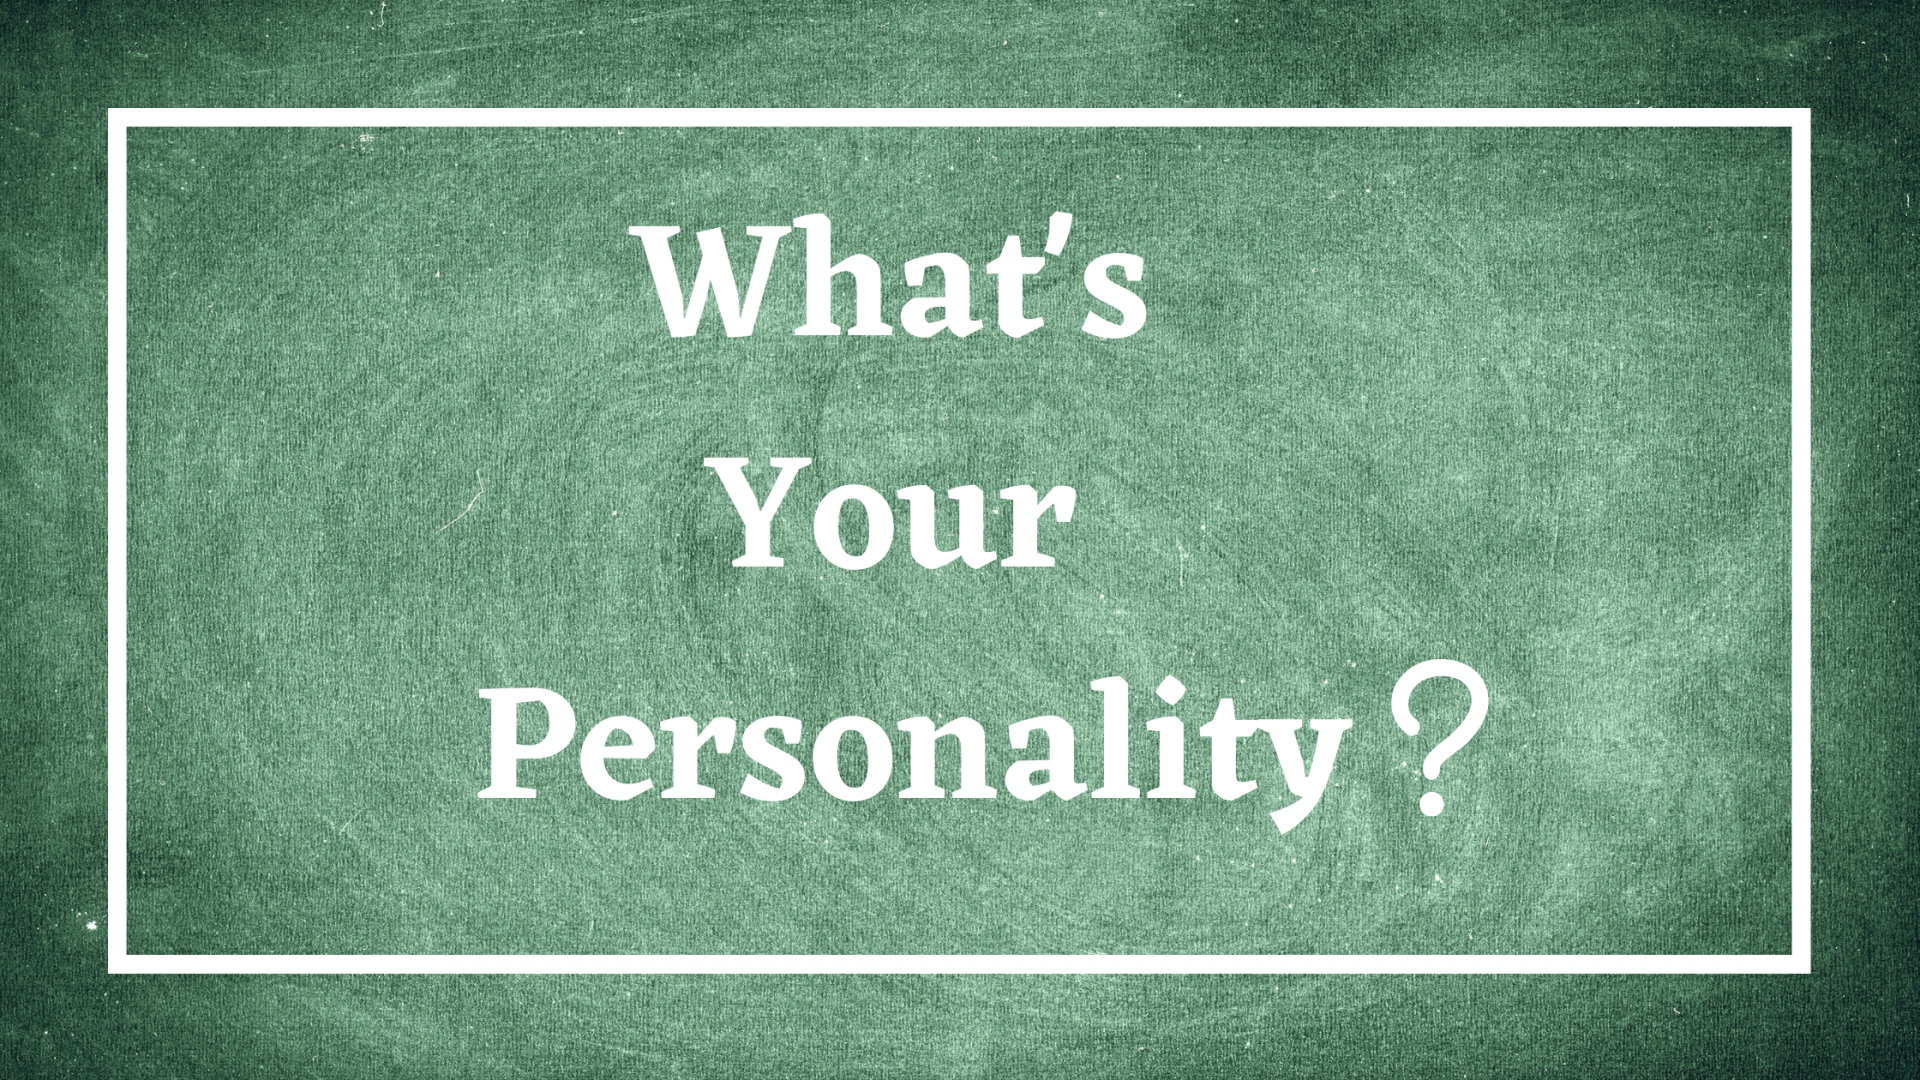 Knowing your personality